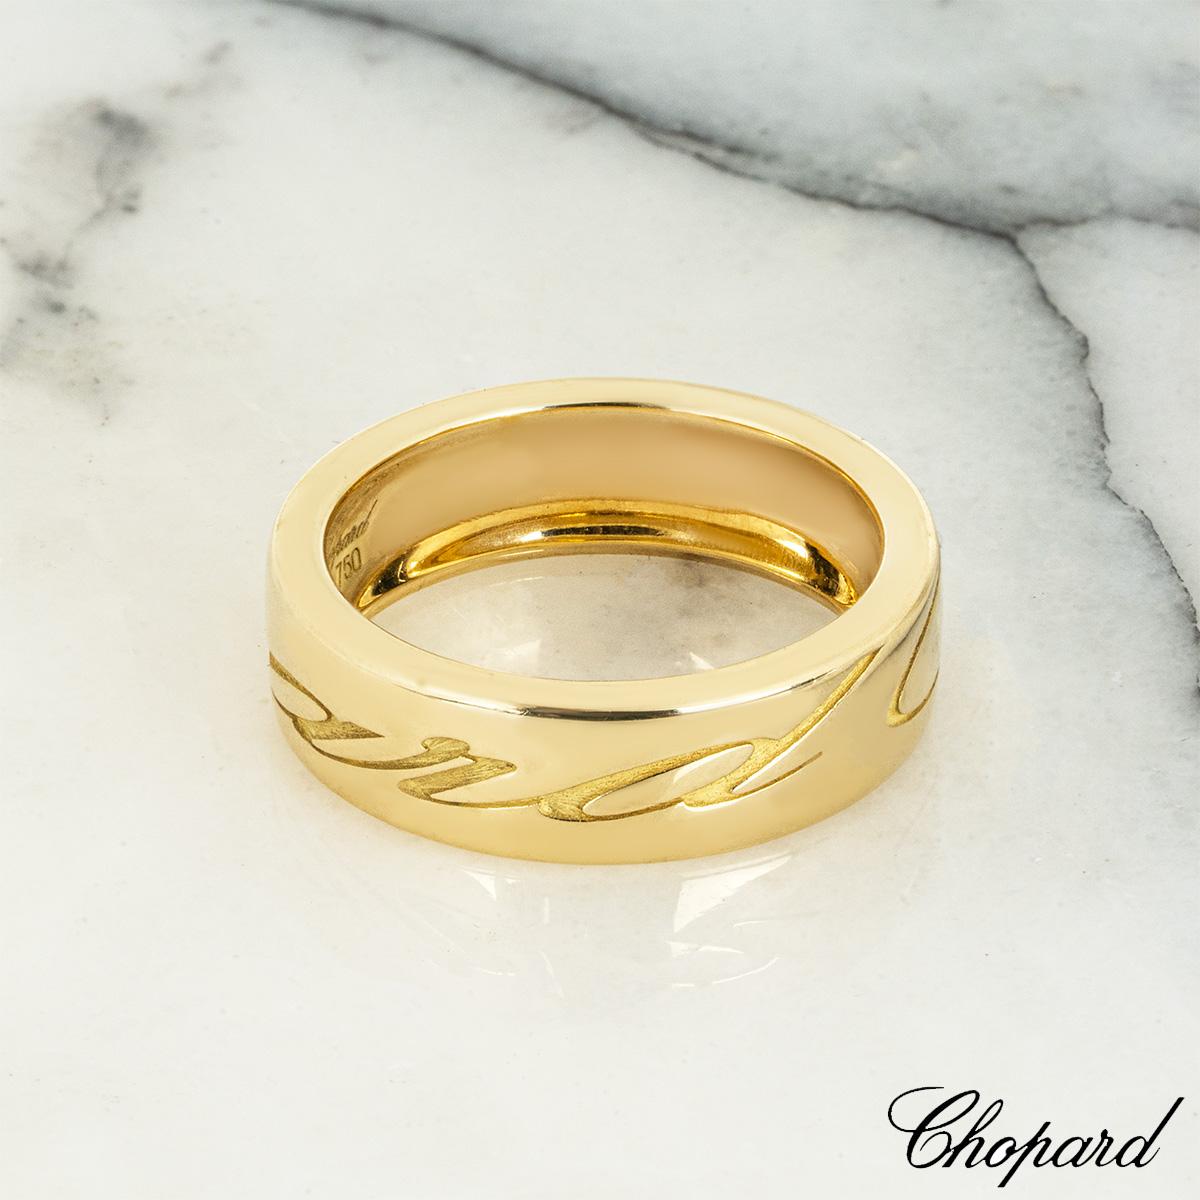 Chopard Yellow Gold Chopardissimo Ring 82/7940-0111 3